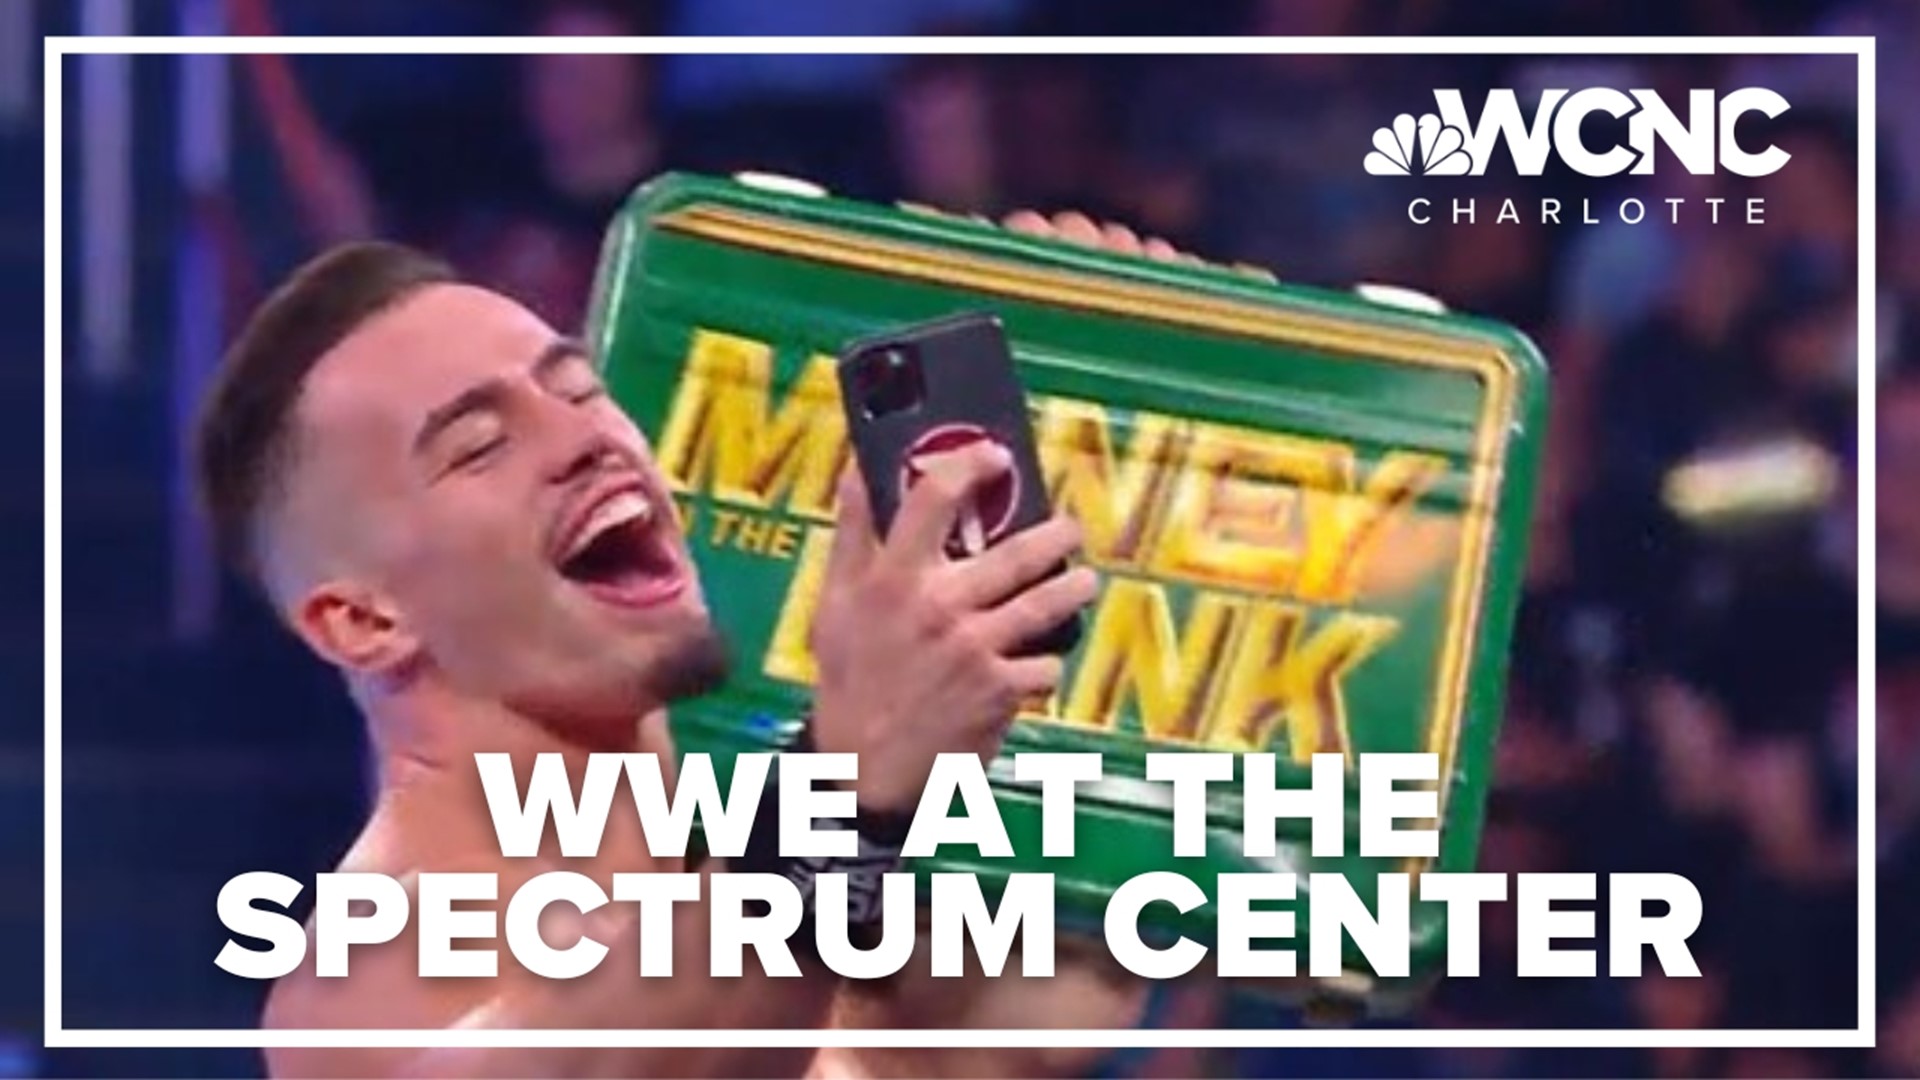 WWE Monday Night Raw will be at the Spectrum Center. The tour is returning to Charlotte for the first time in four years.